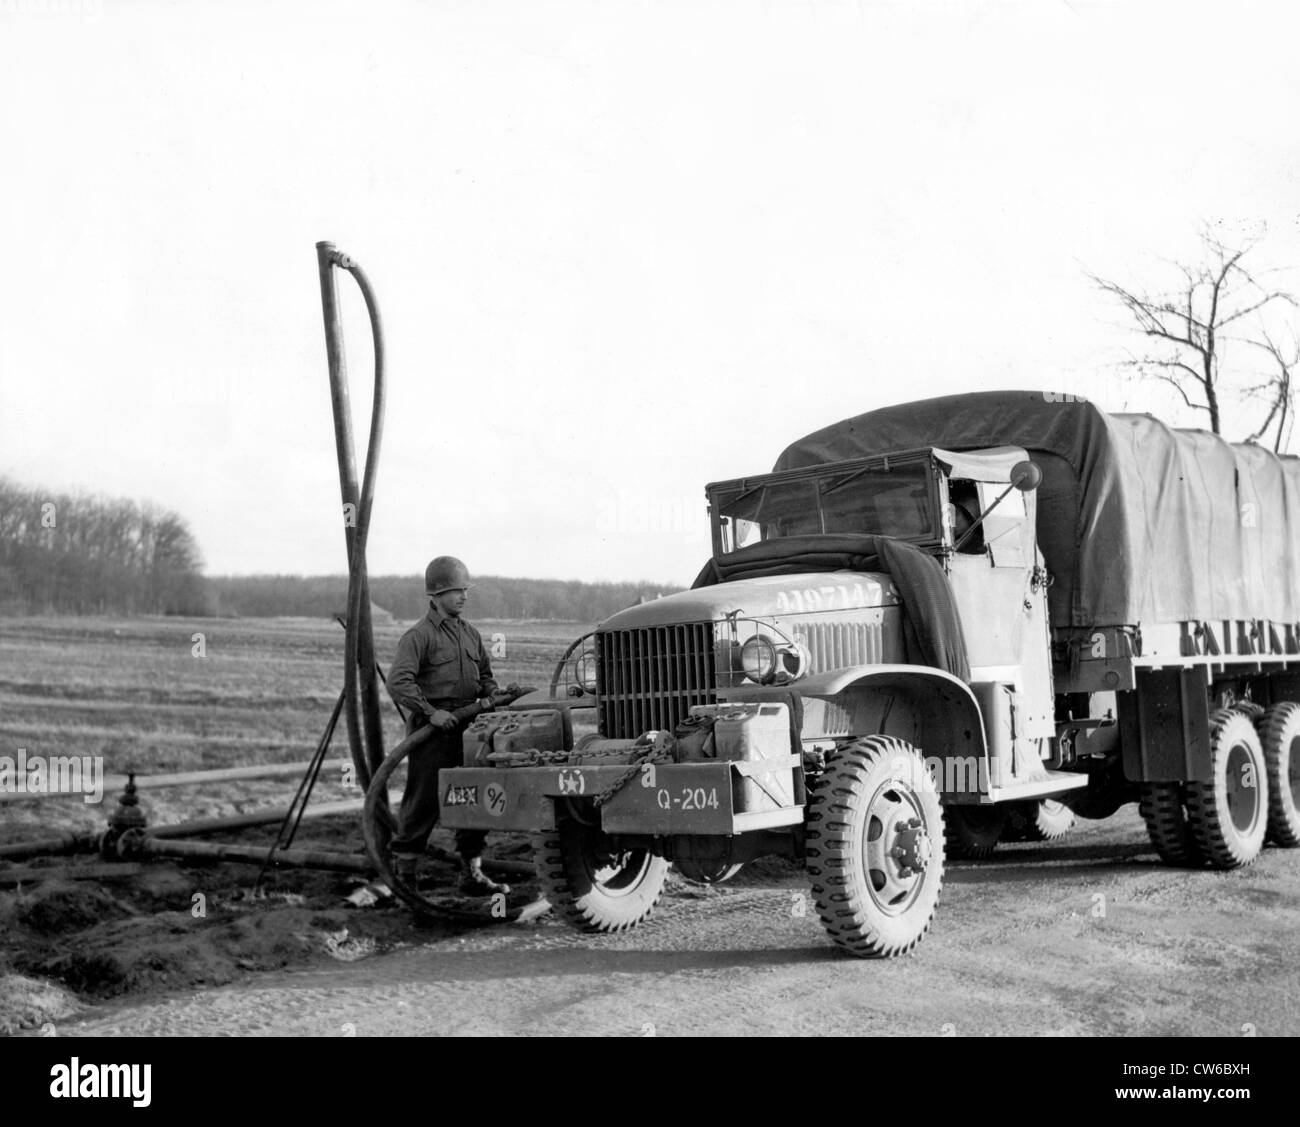 A U.S truck refueled in France (March 21,1945) Stock Photo